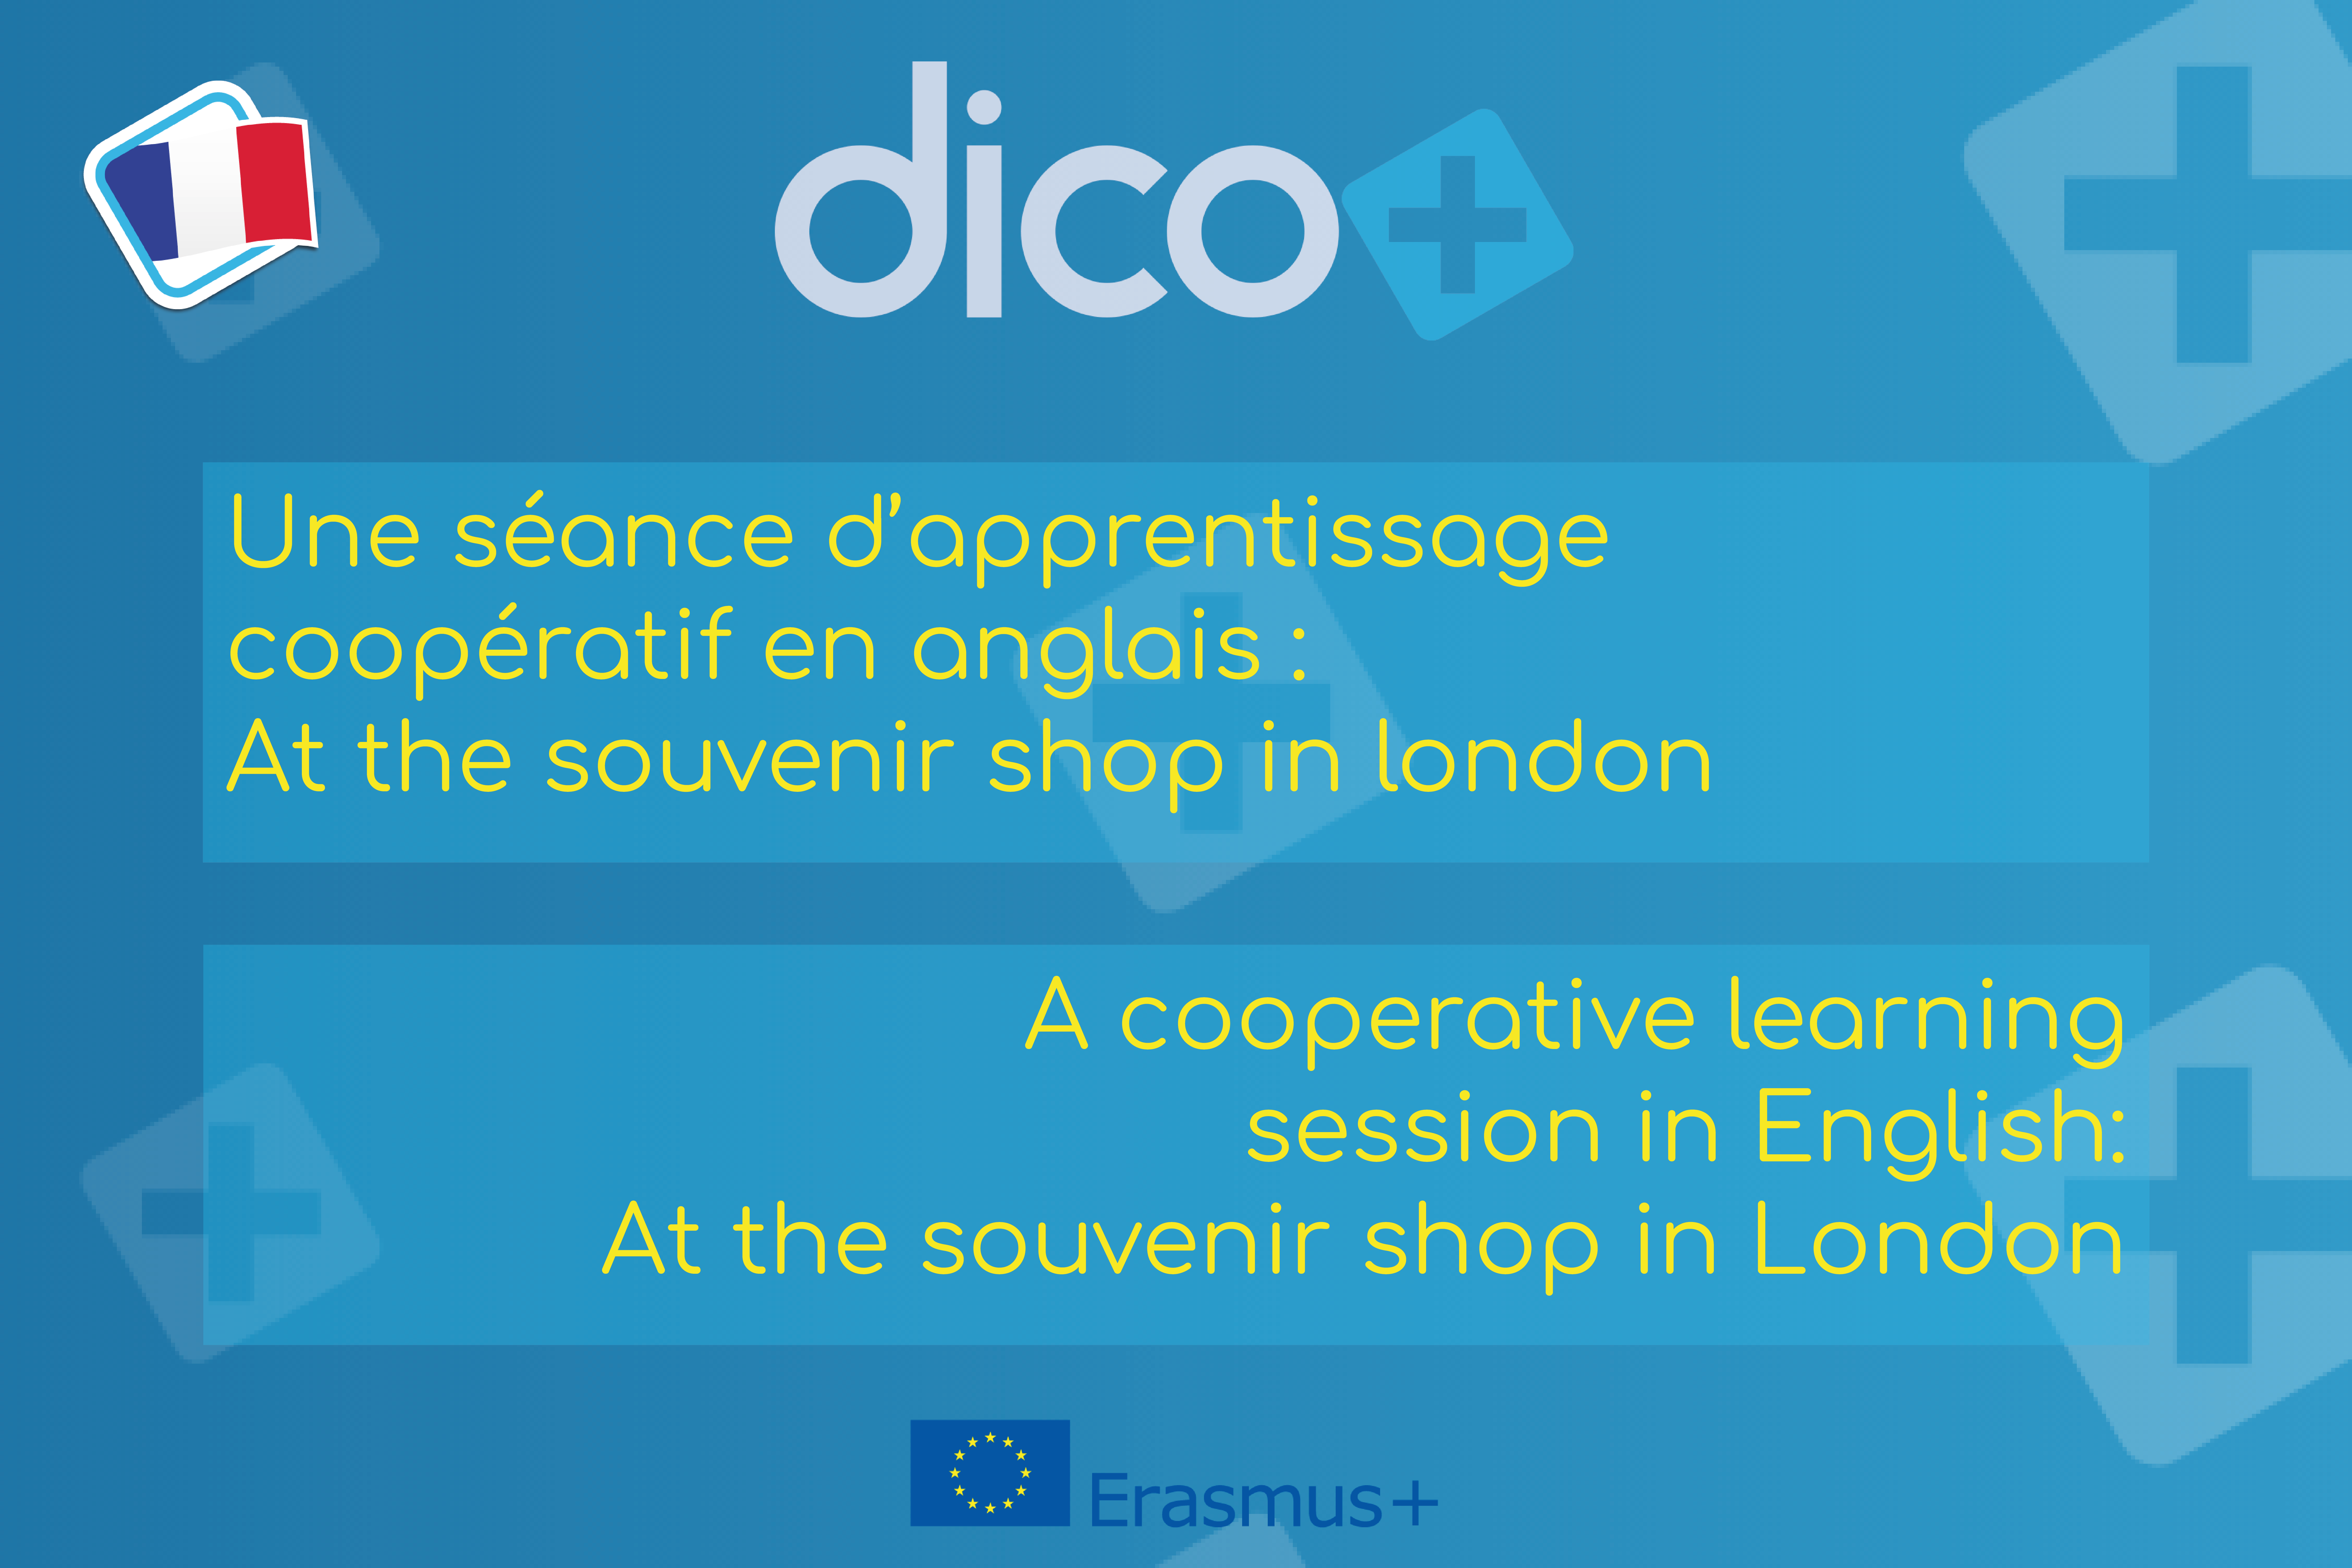 A cooperative learning session in English: At the souvenir shop in London